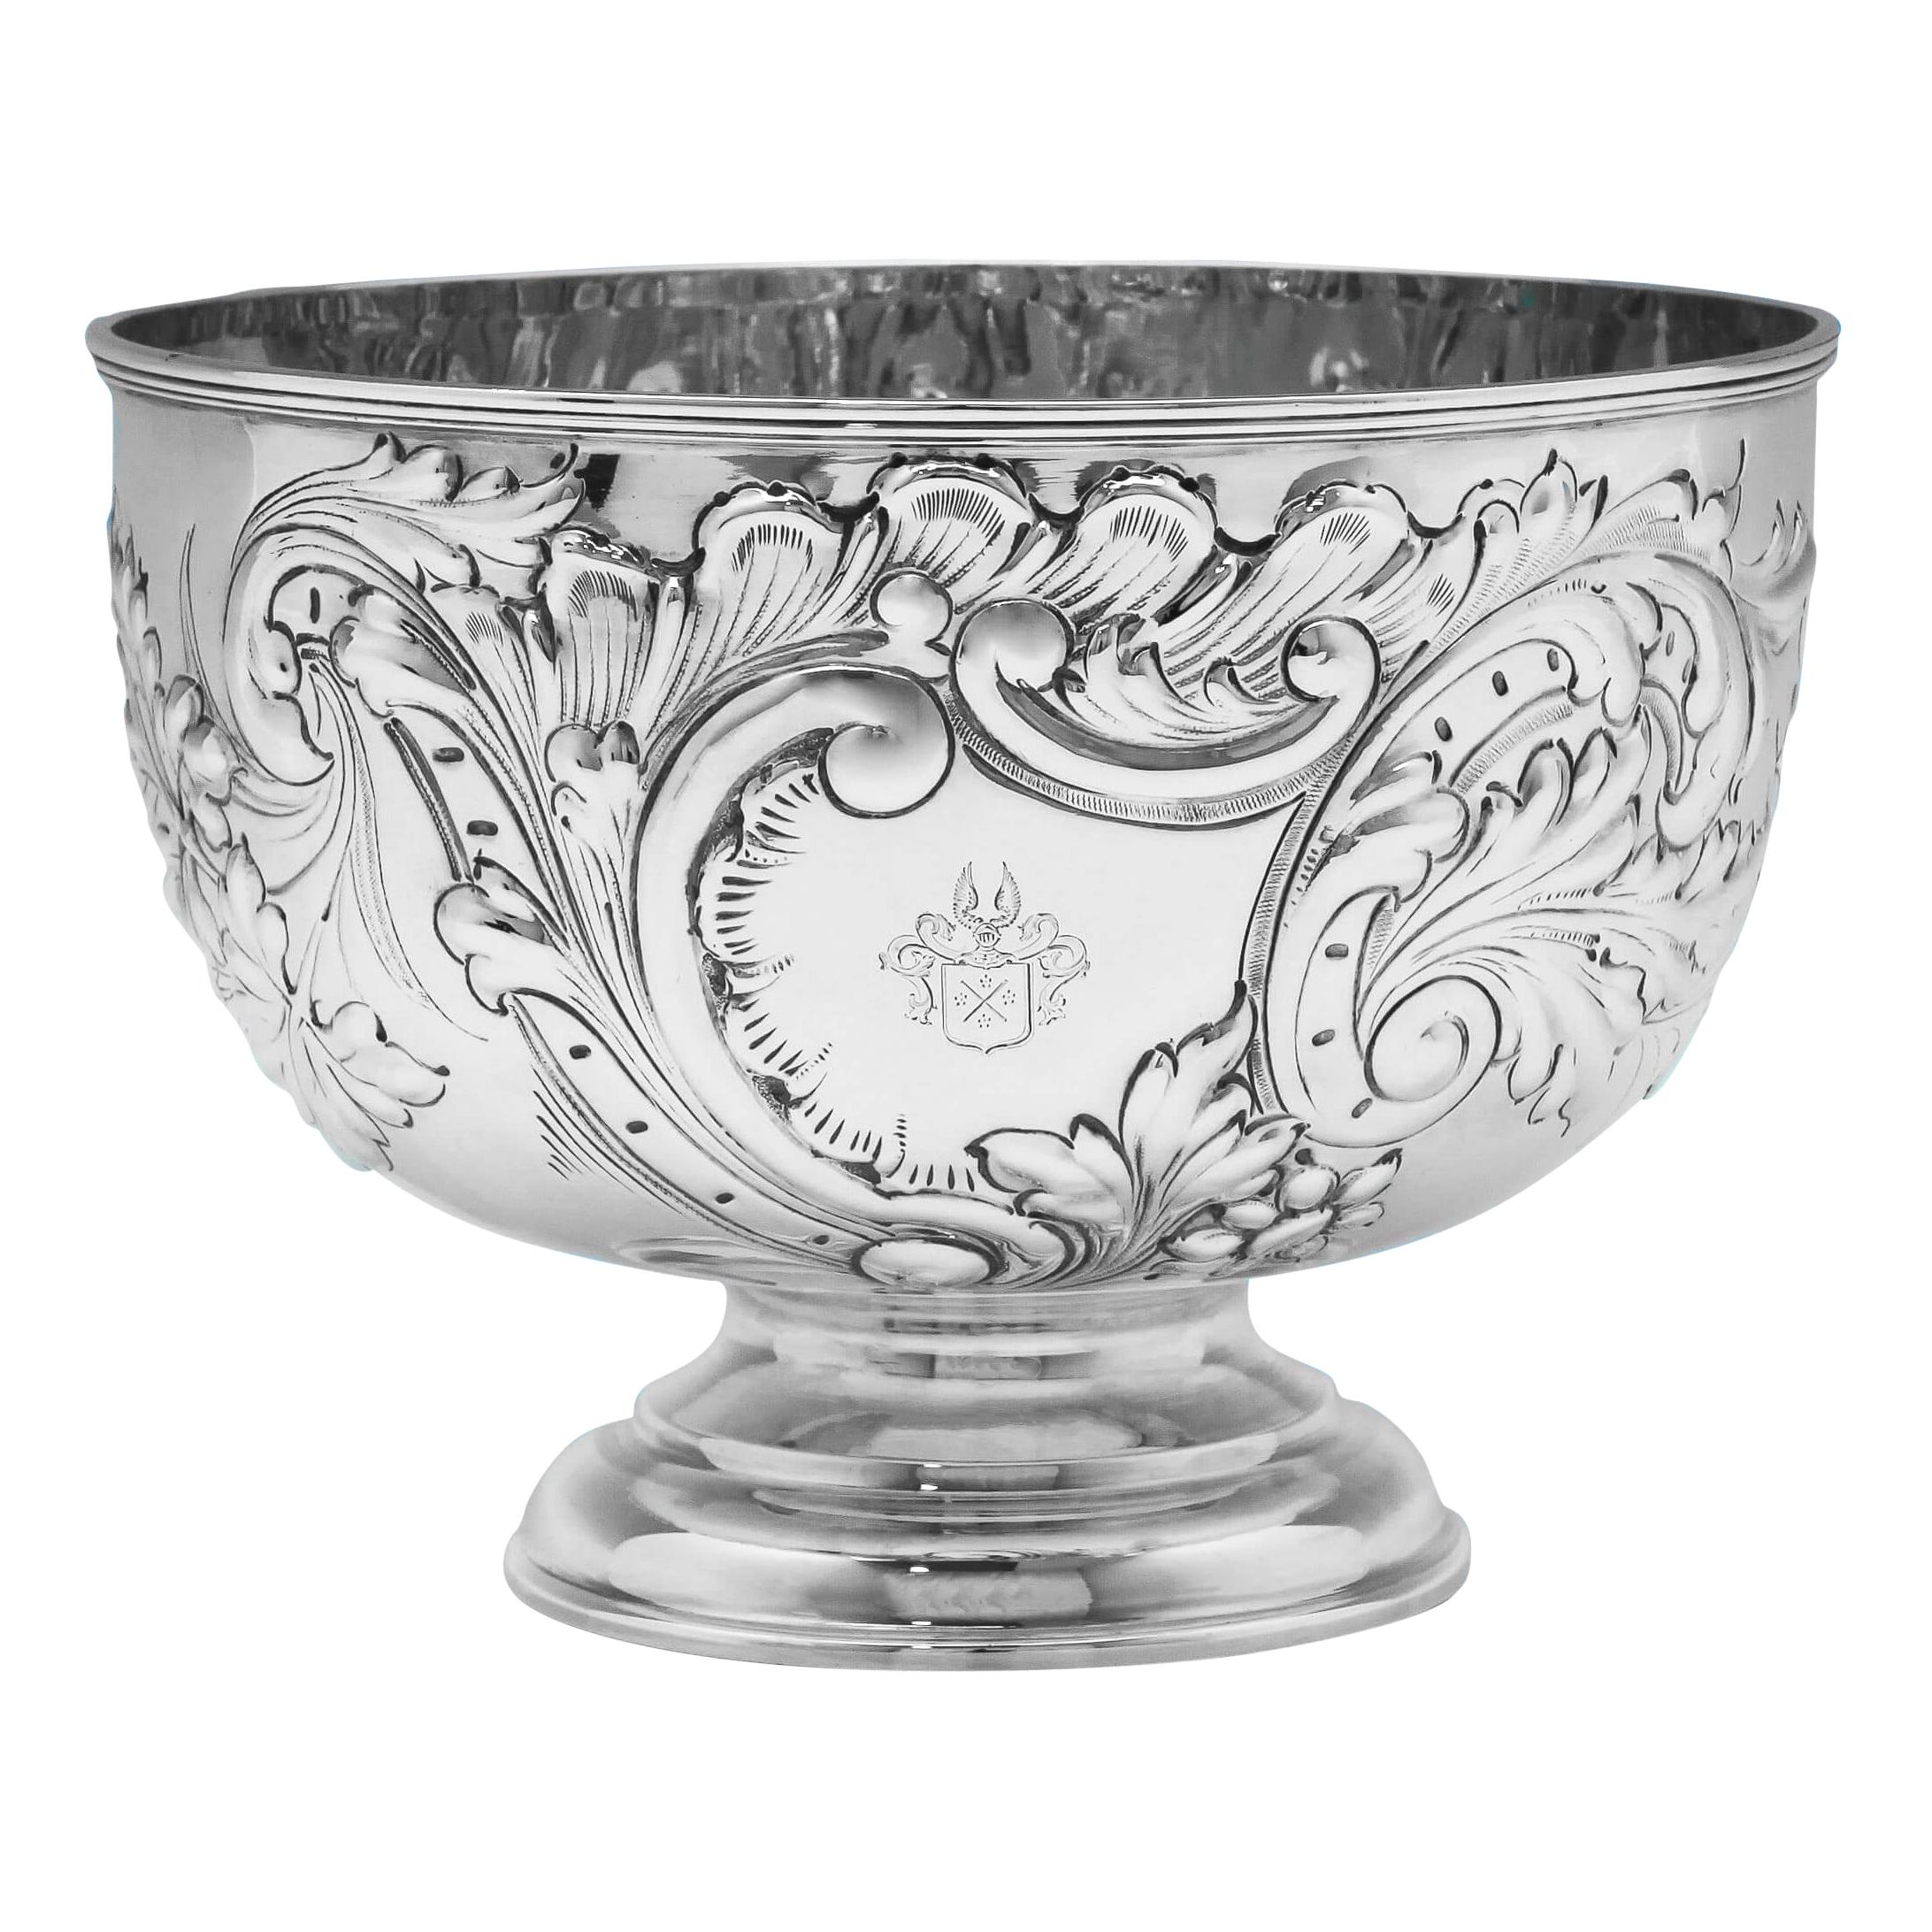 19th Century Victorian Ornate Chased Antique Sterling Silver Bowl